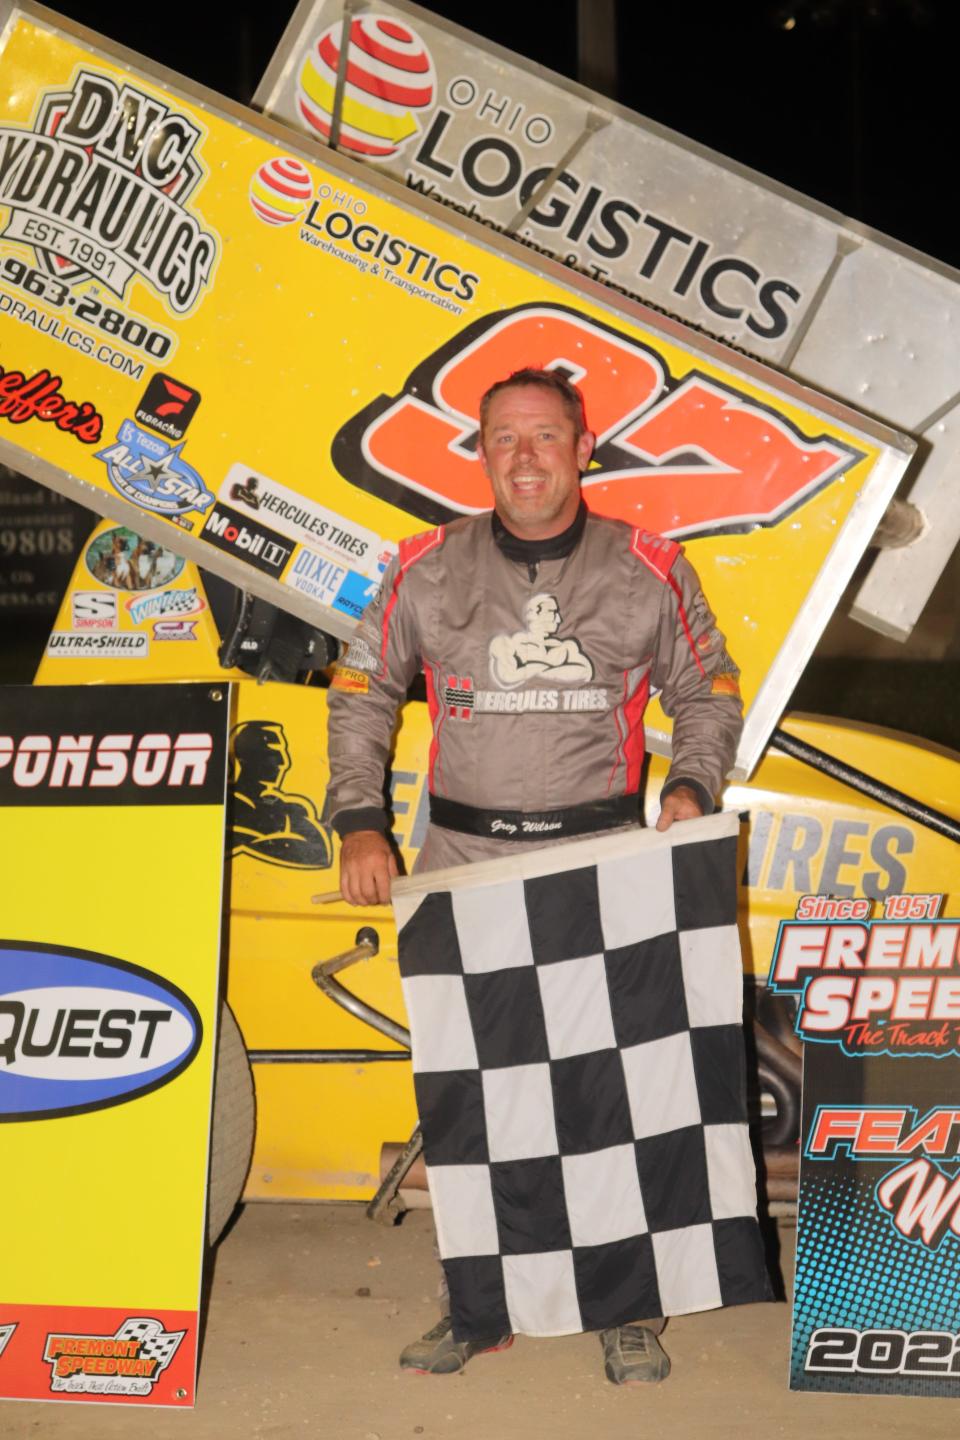 Greg Wilson celebrates after winning for the second time this season at Fremont Speedway.